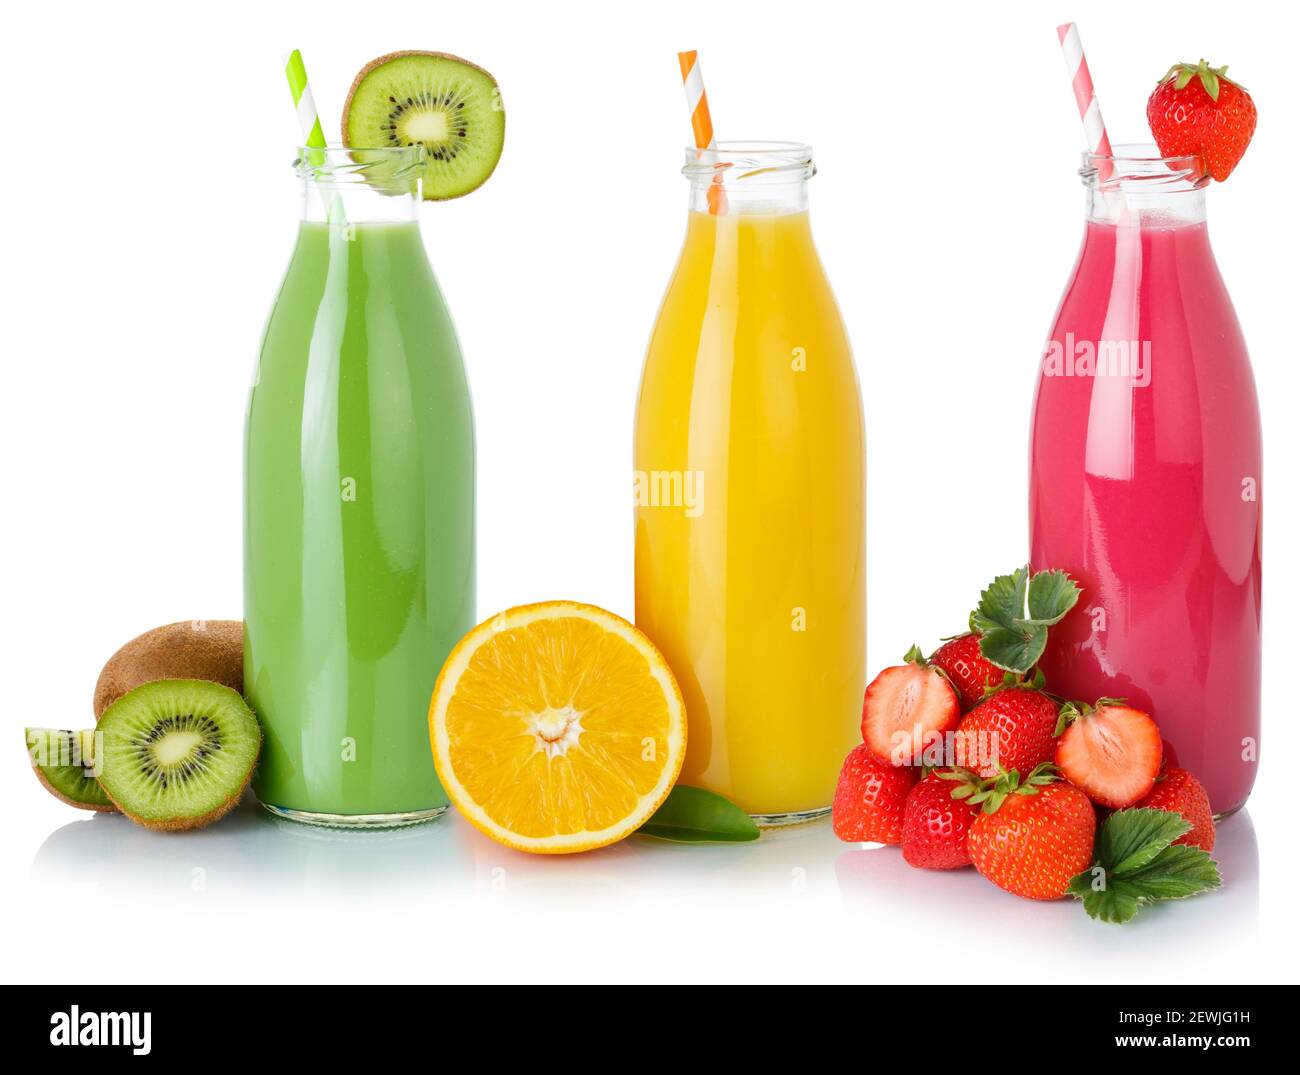 Fruit smoothie smoothies juice drink drinks straw bottles isolated on a white background. Stock Photo